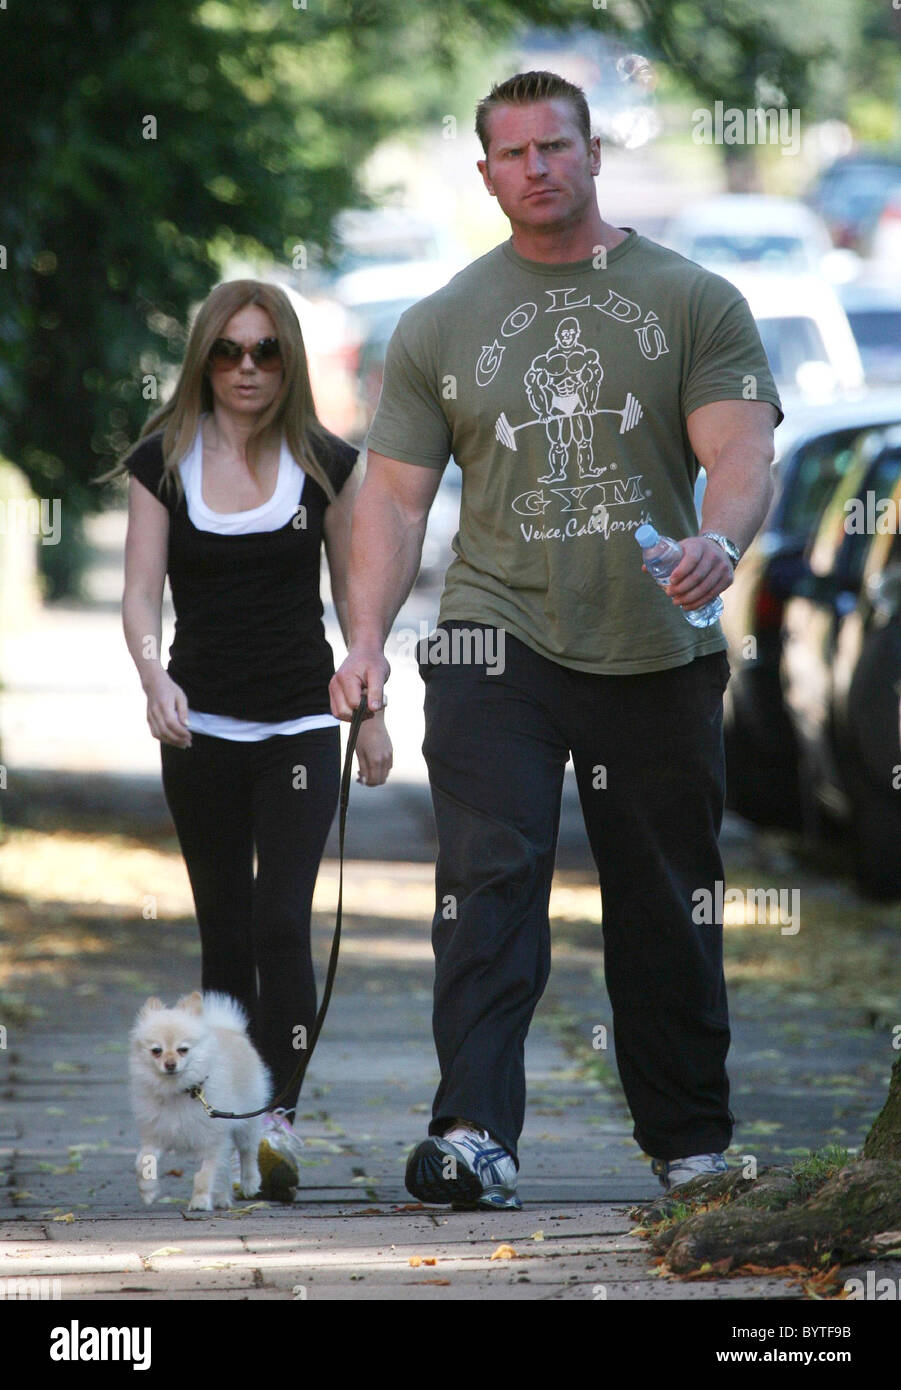 Geri Halliwell and her personal fitness instructor Tim Blakeley leave Geri's house to go for a jog with her dog 'daddy'. It was Stock Photo